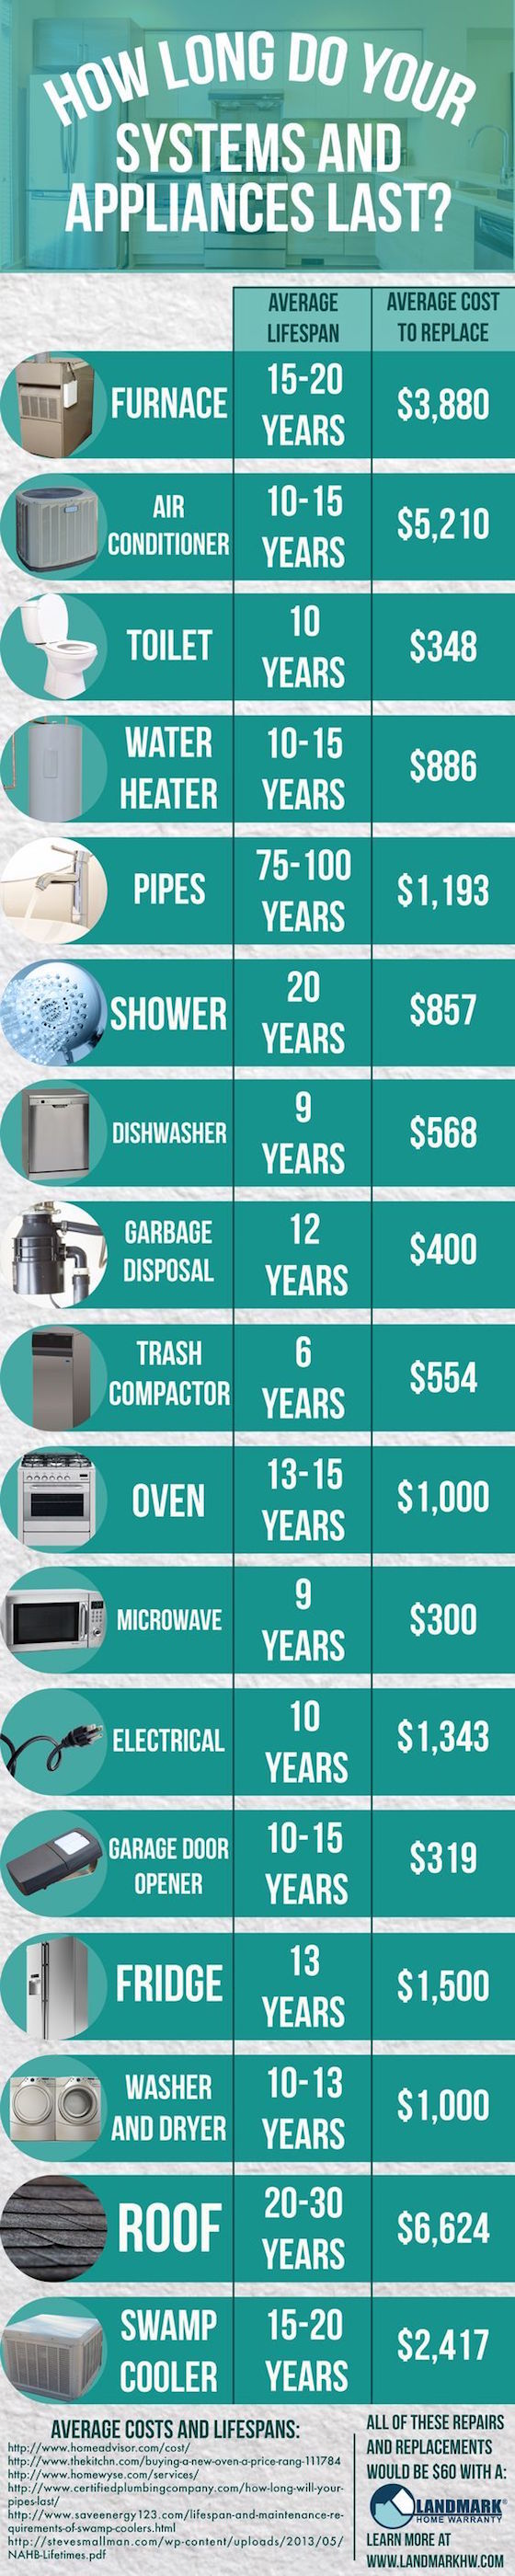 How long do your appliances and systems last?